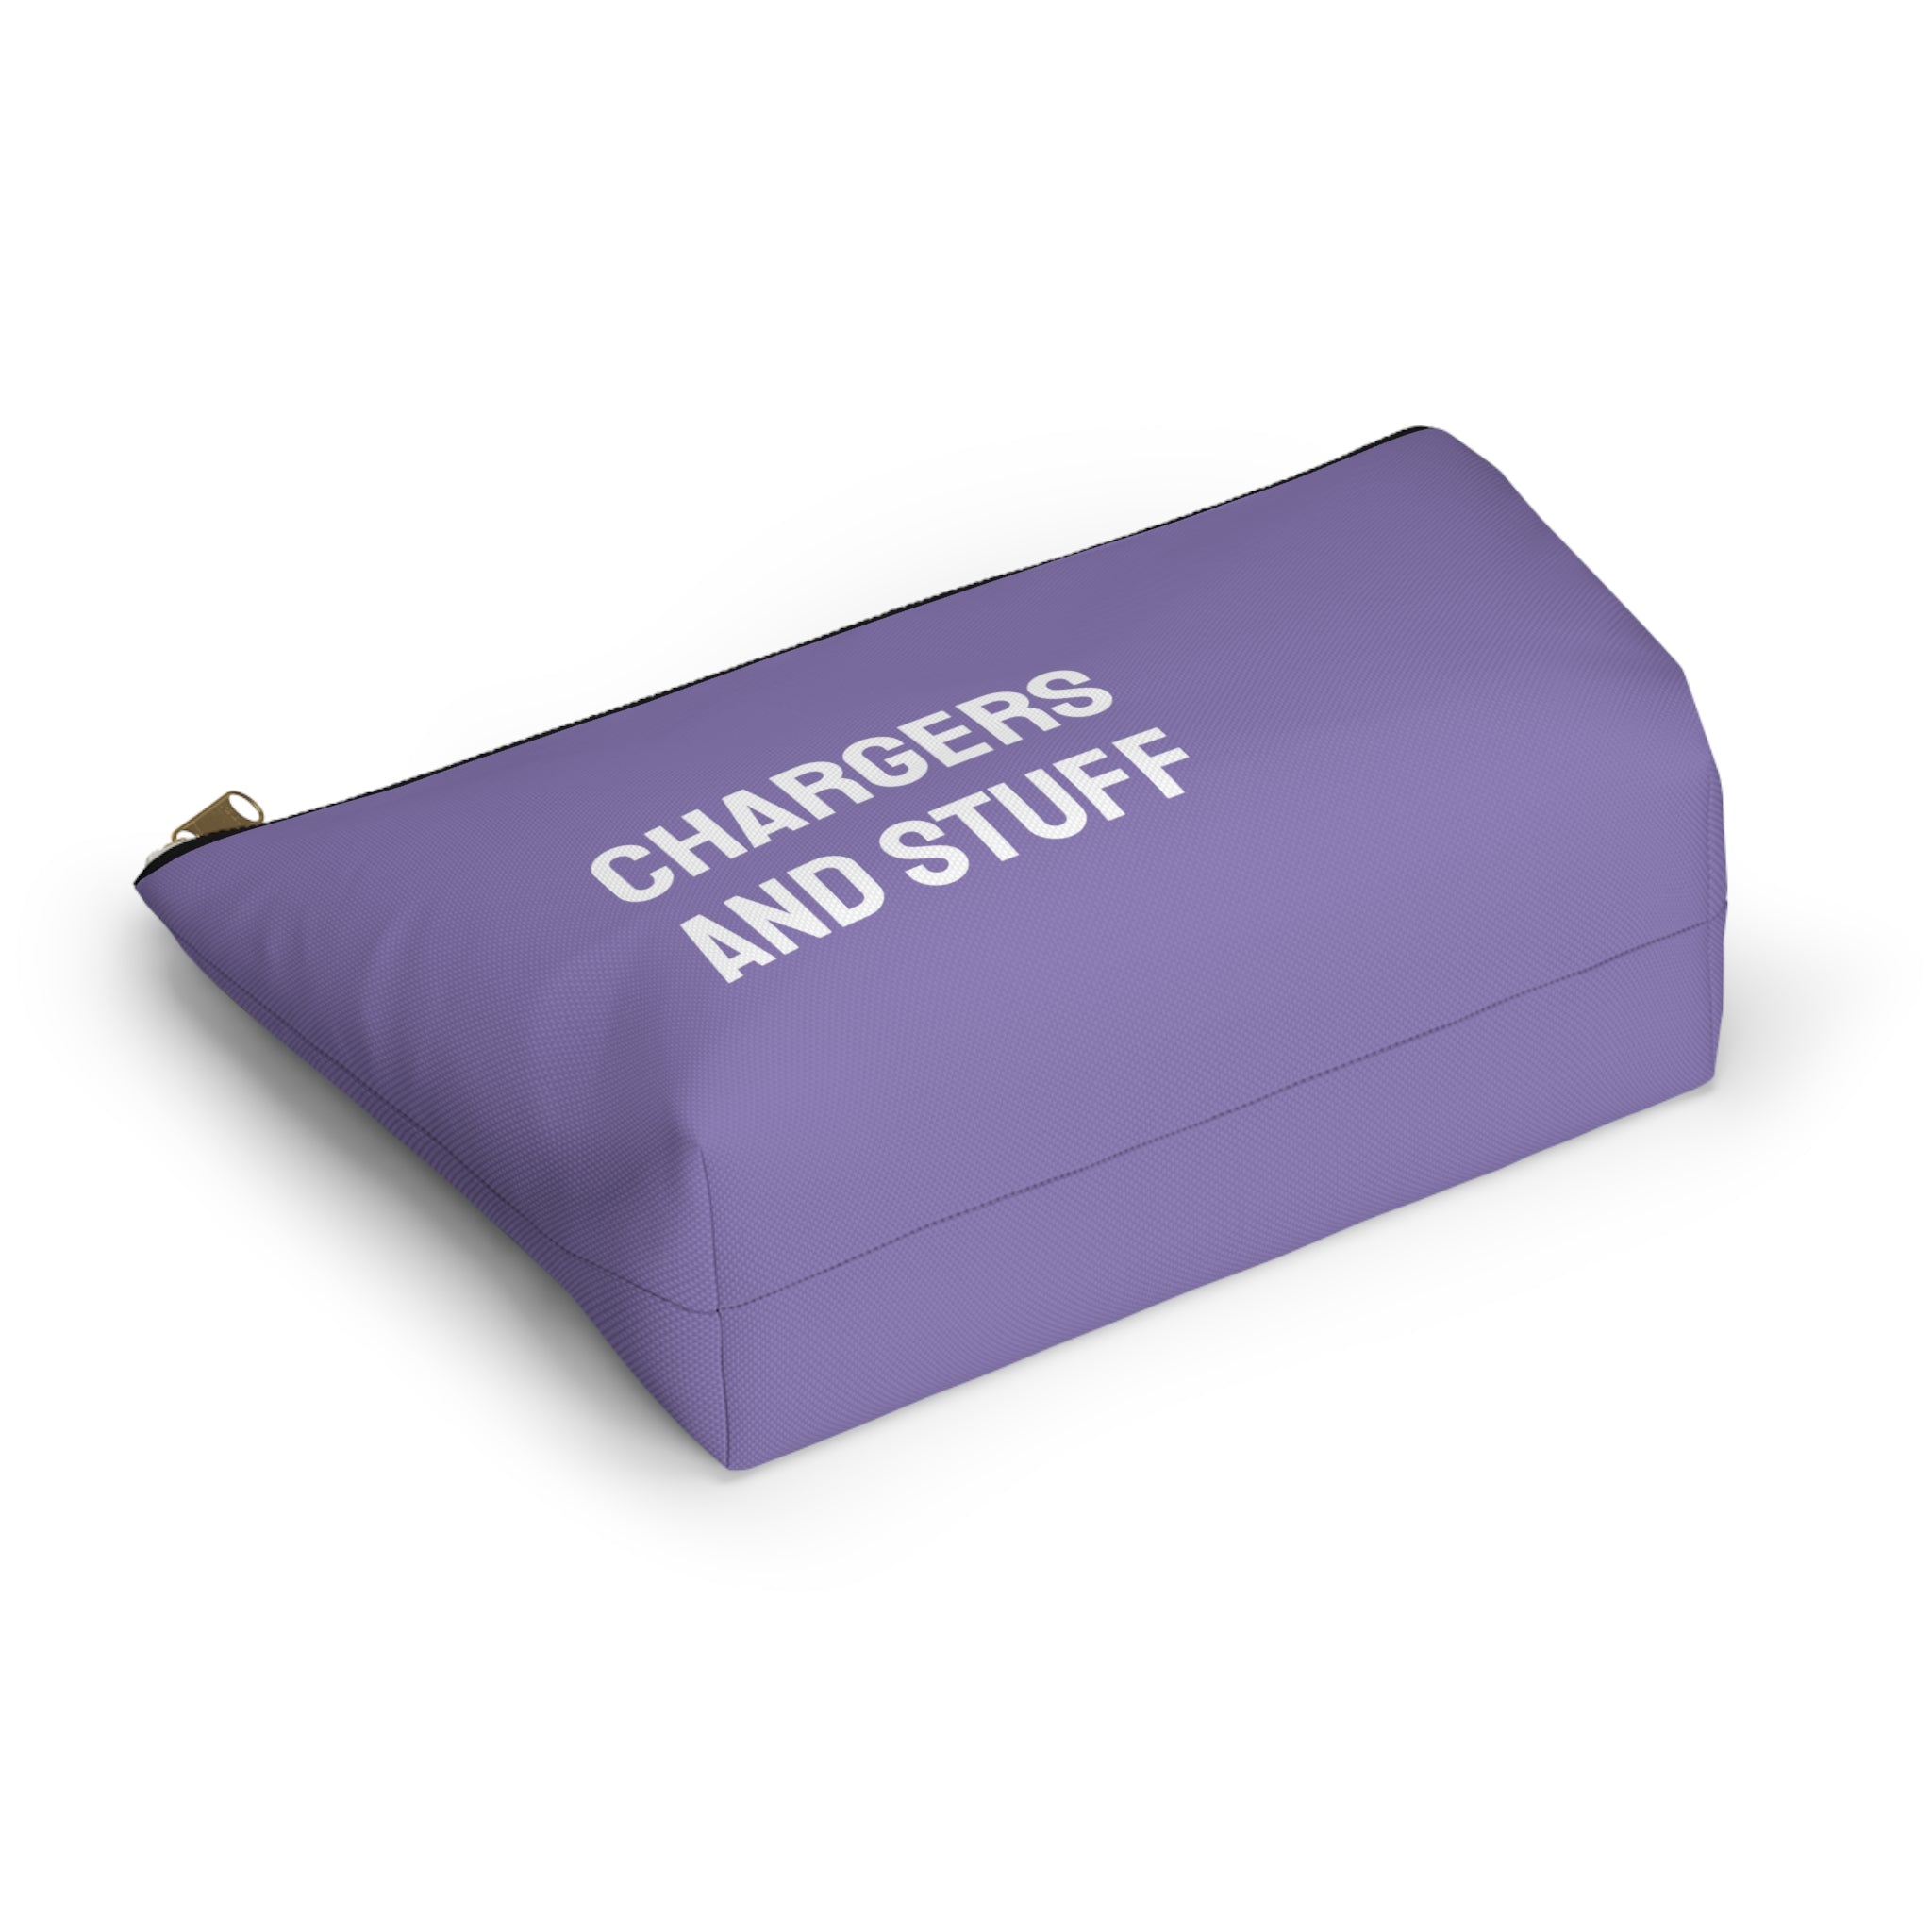 Chargers & stuff Pouch (Purple)